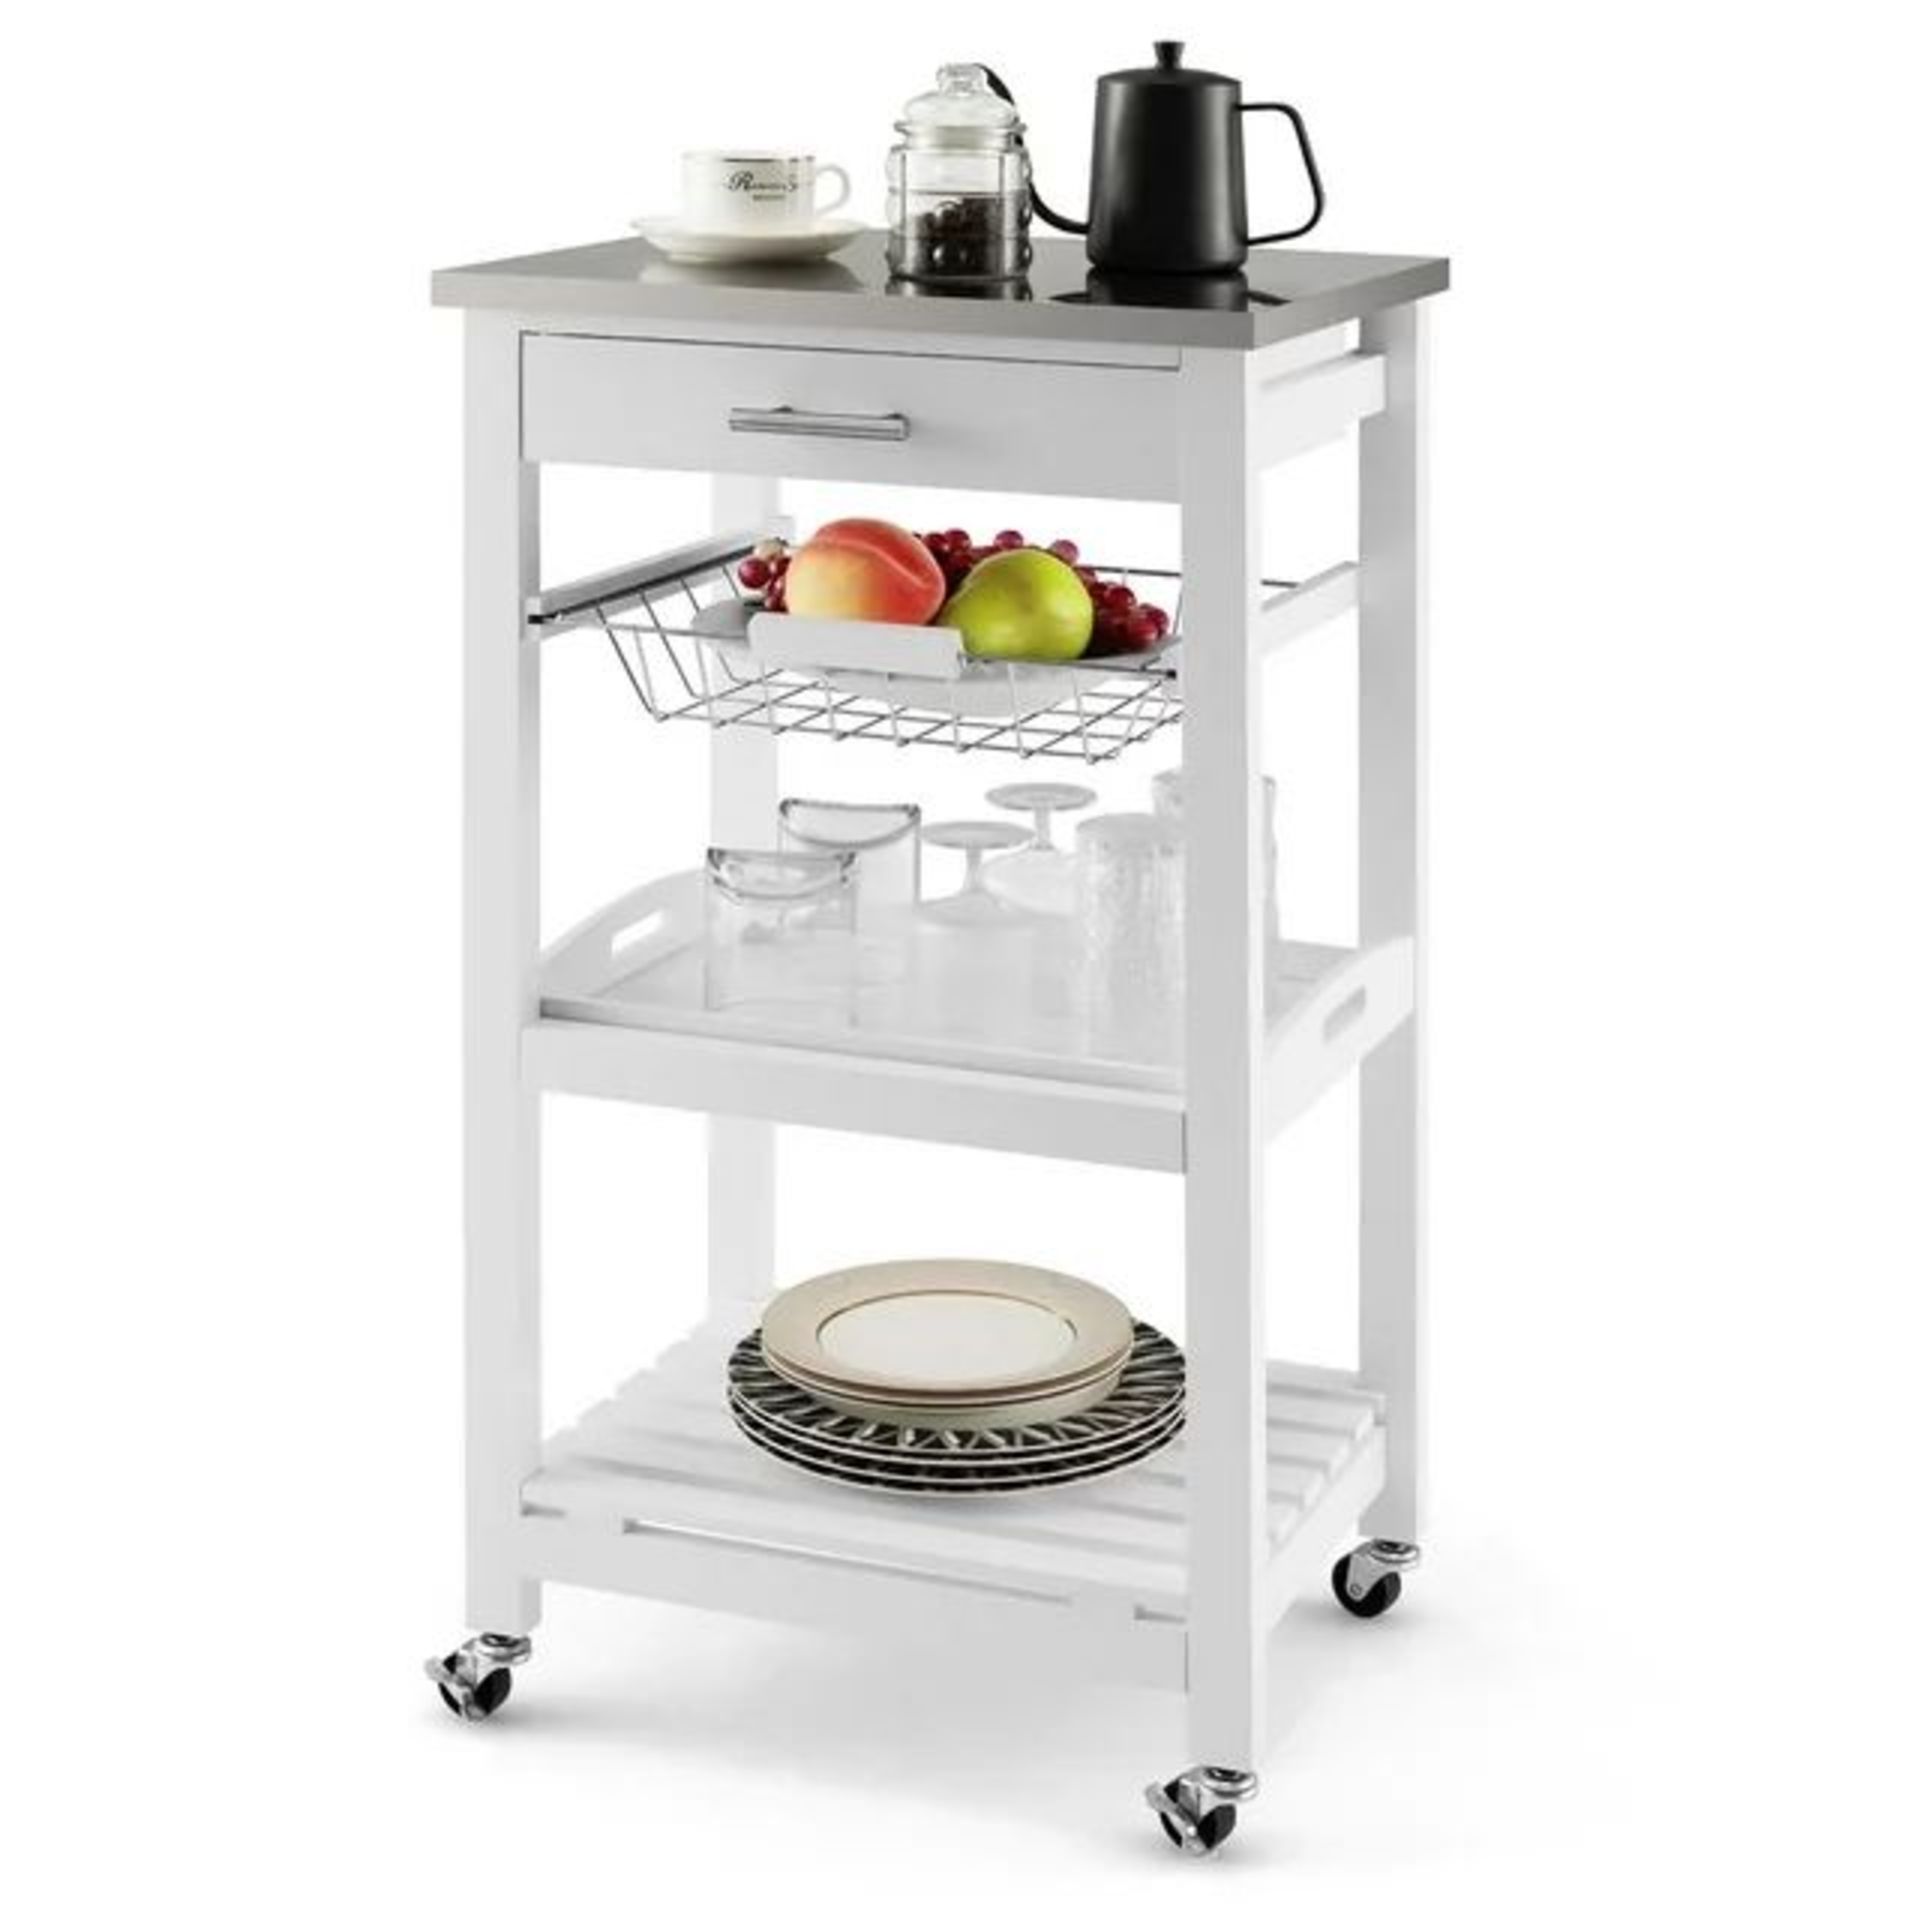 Costway Compact Kitchen Island Cart Rolling Service Trolley withStainless Steel Top Basket - ER53